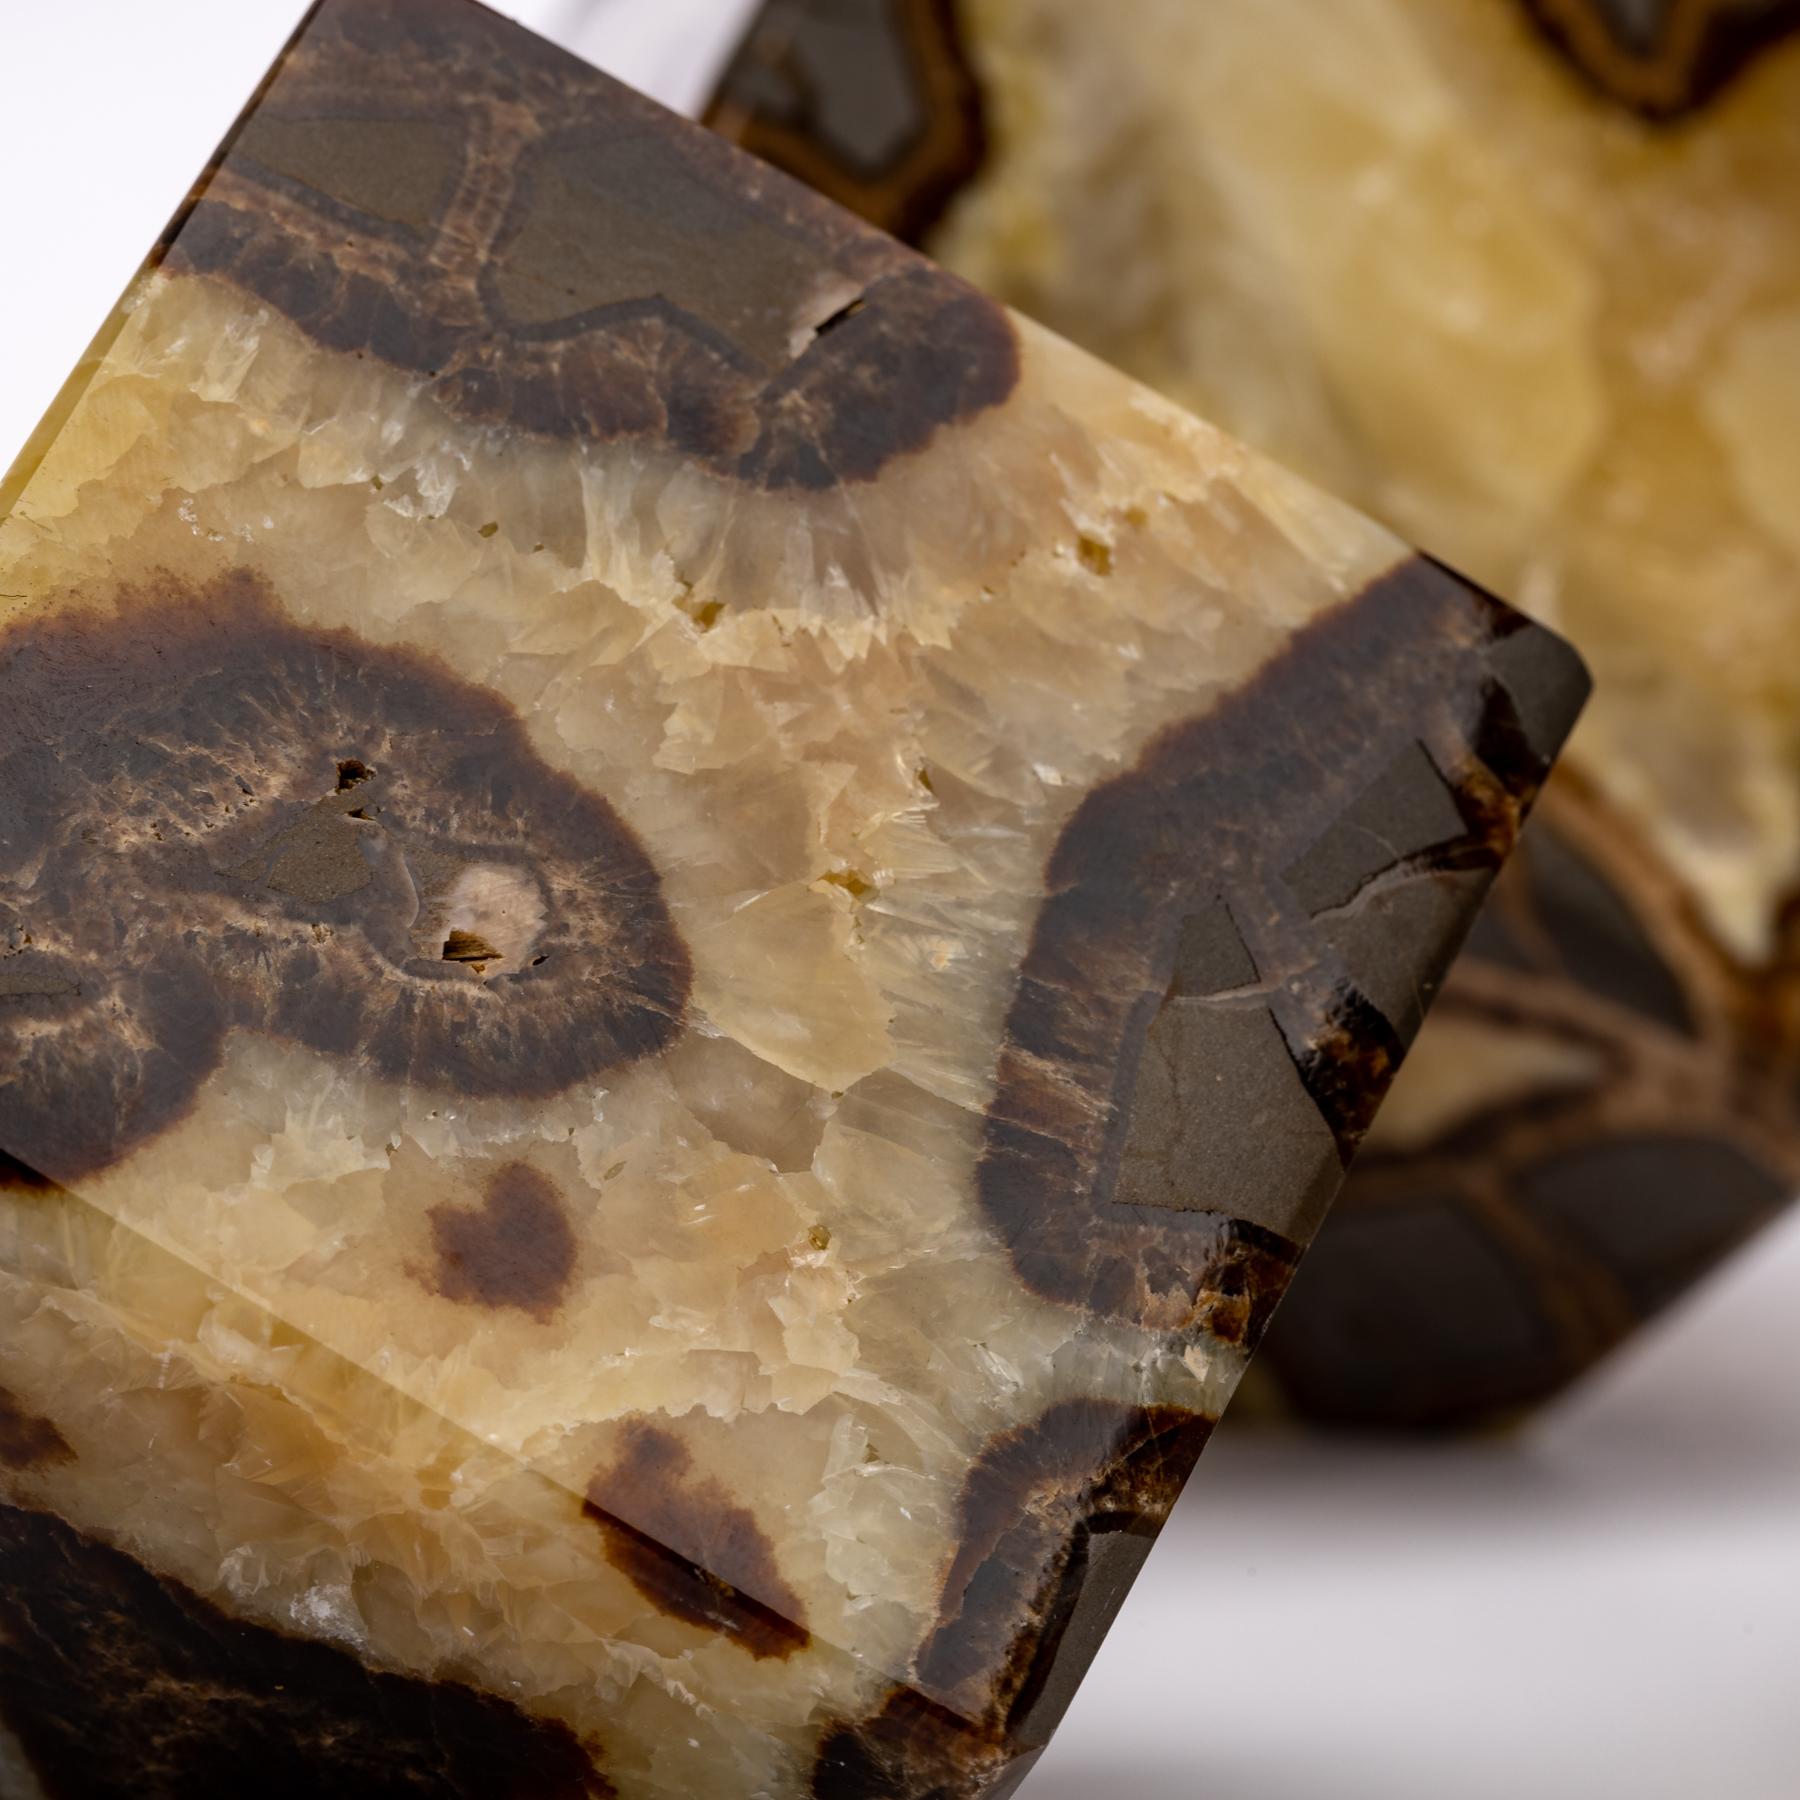 Polished Beautiful Decorative Set of Three Cubes of Septarian from Madagascar